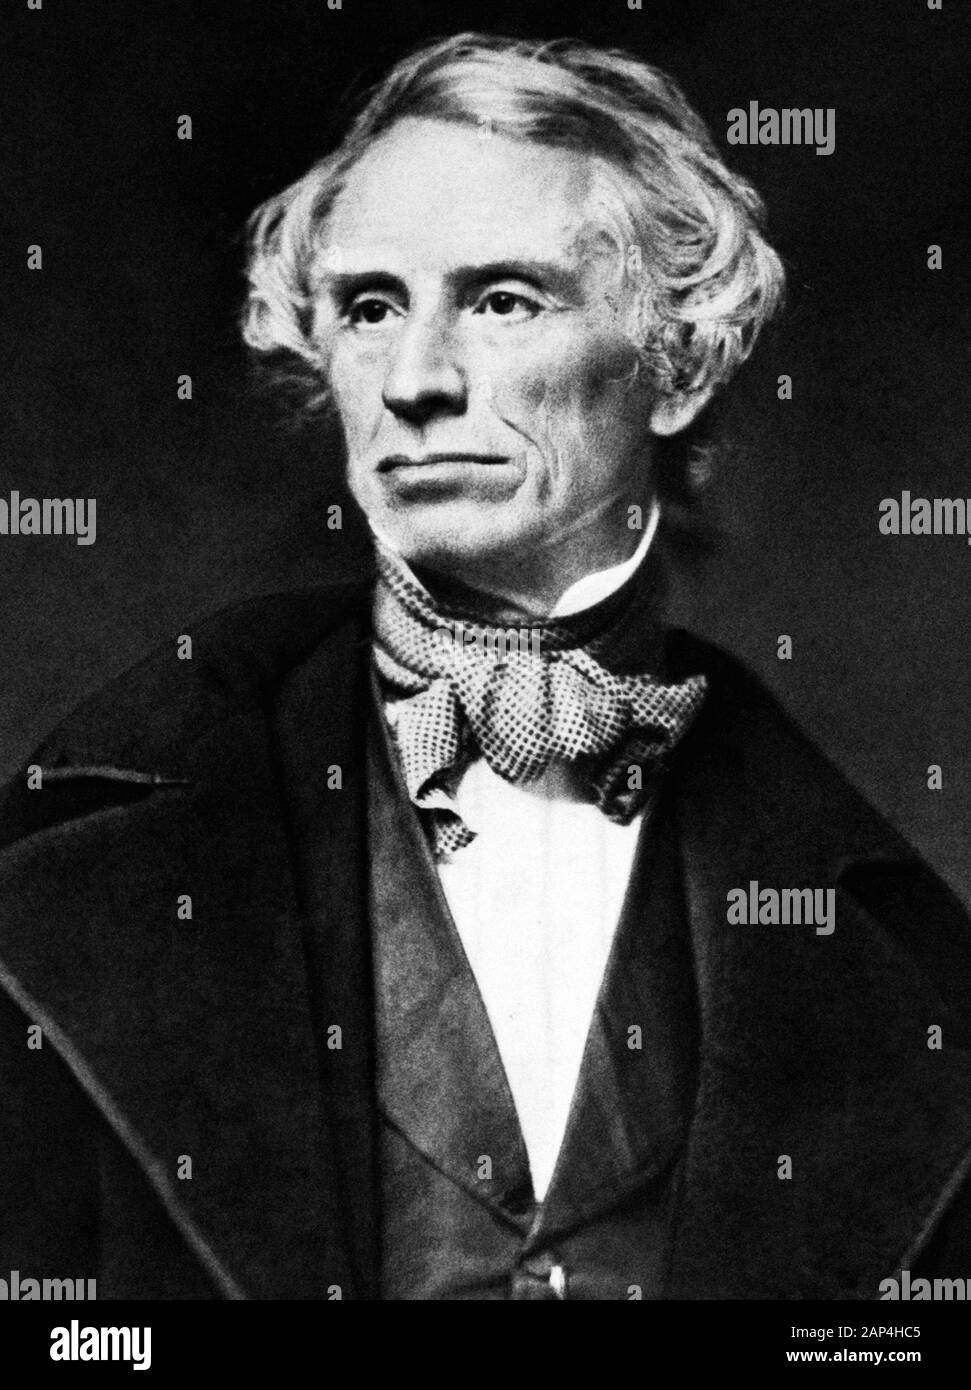 Vintage portrait photo of American painter and inventor Samuel F B Morse (1791 – 1872) – a pioneer in the development of the electric telegraph and co-creator of Morse Code. Photo circa 1855 by Mathew B Brady. Stock Photo